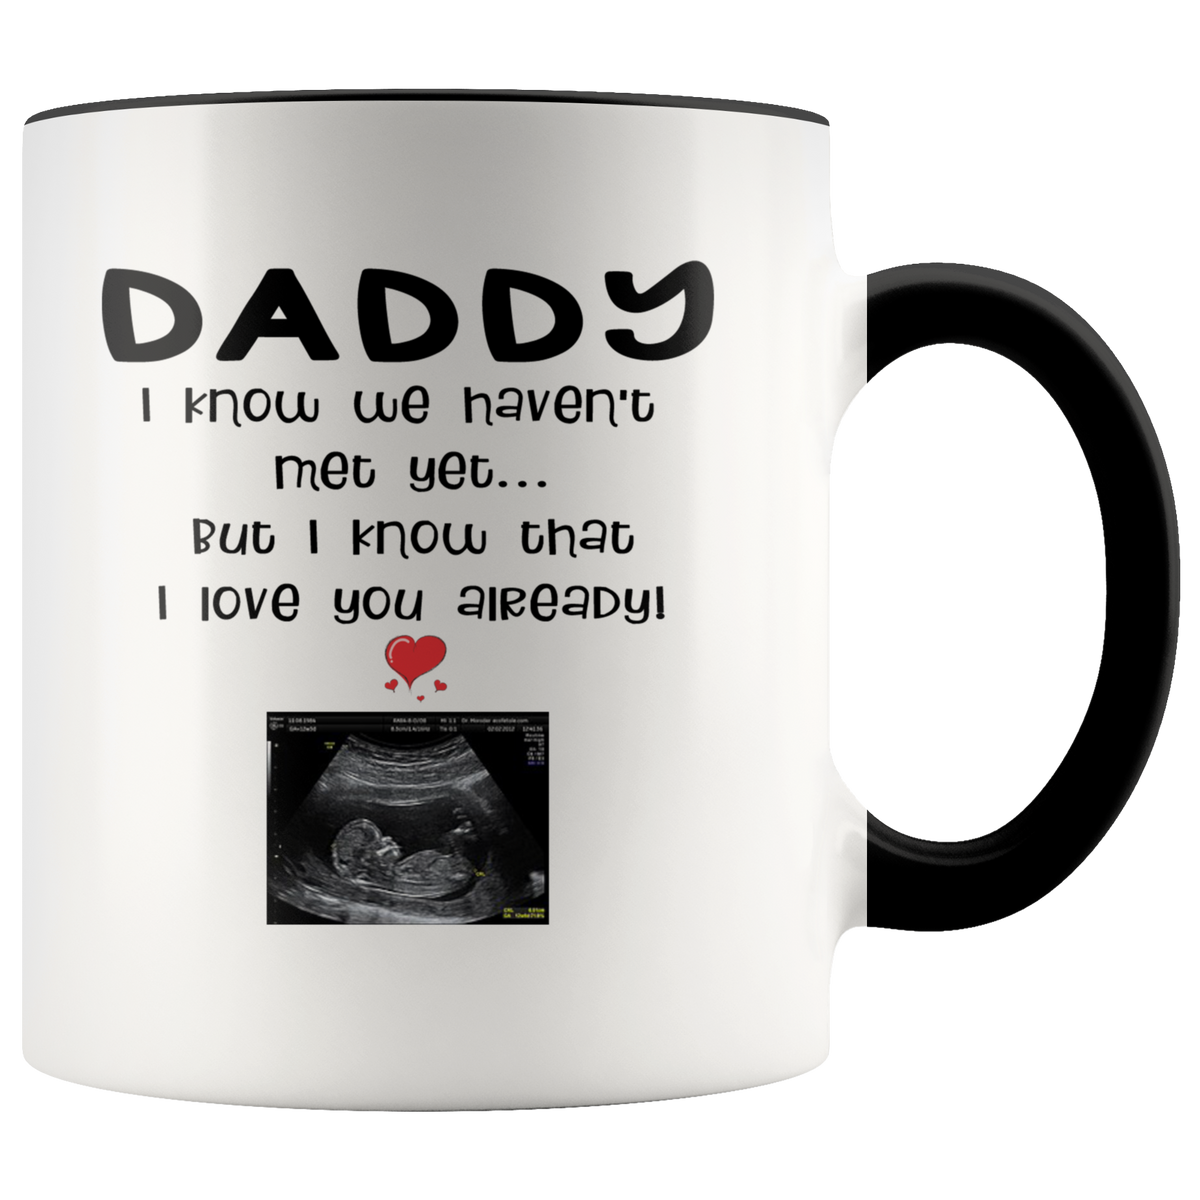 Personalized Dad Mug With Your Baby's Ultrasound Image For New Expectant Dad (black)